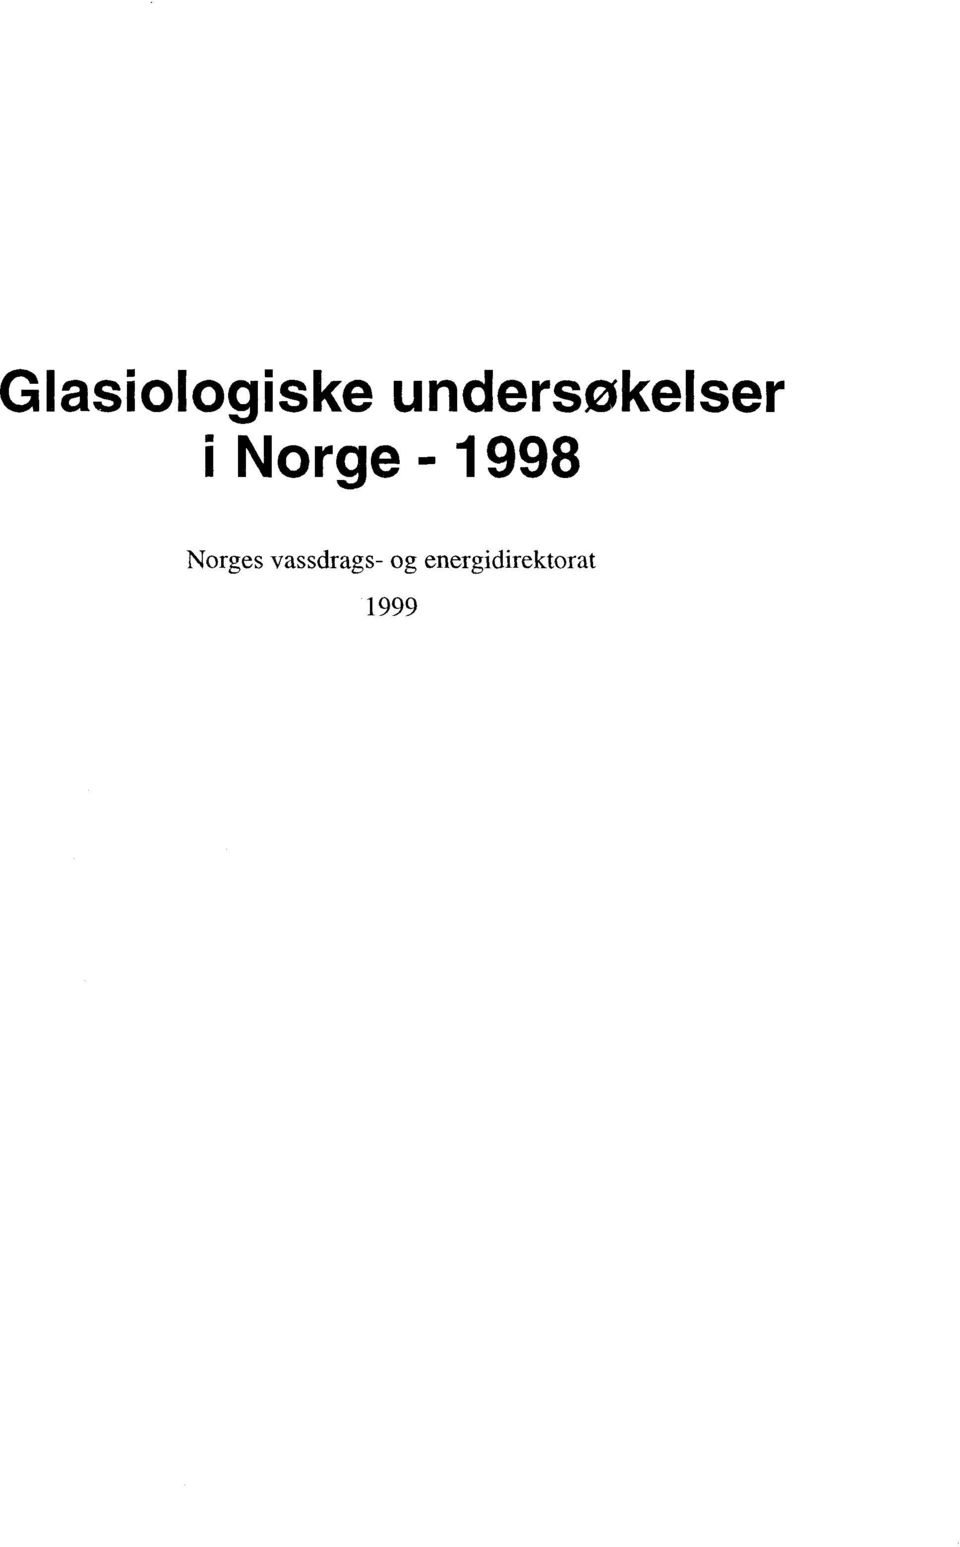 - 1998 Norges